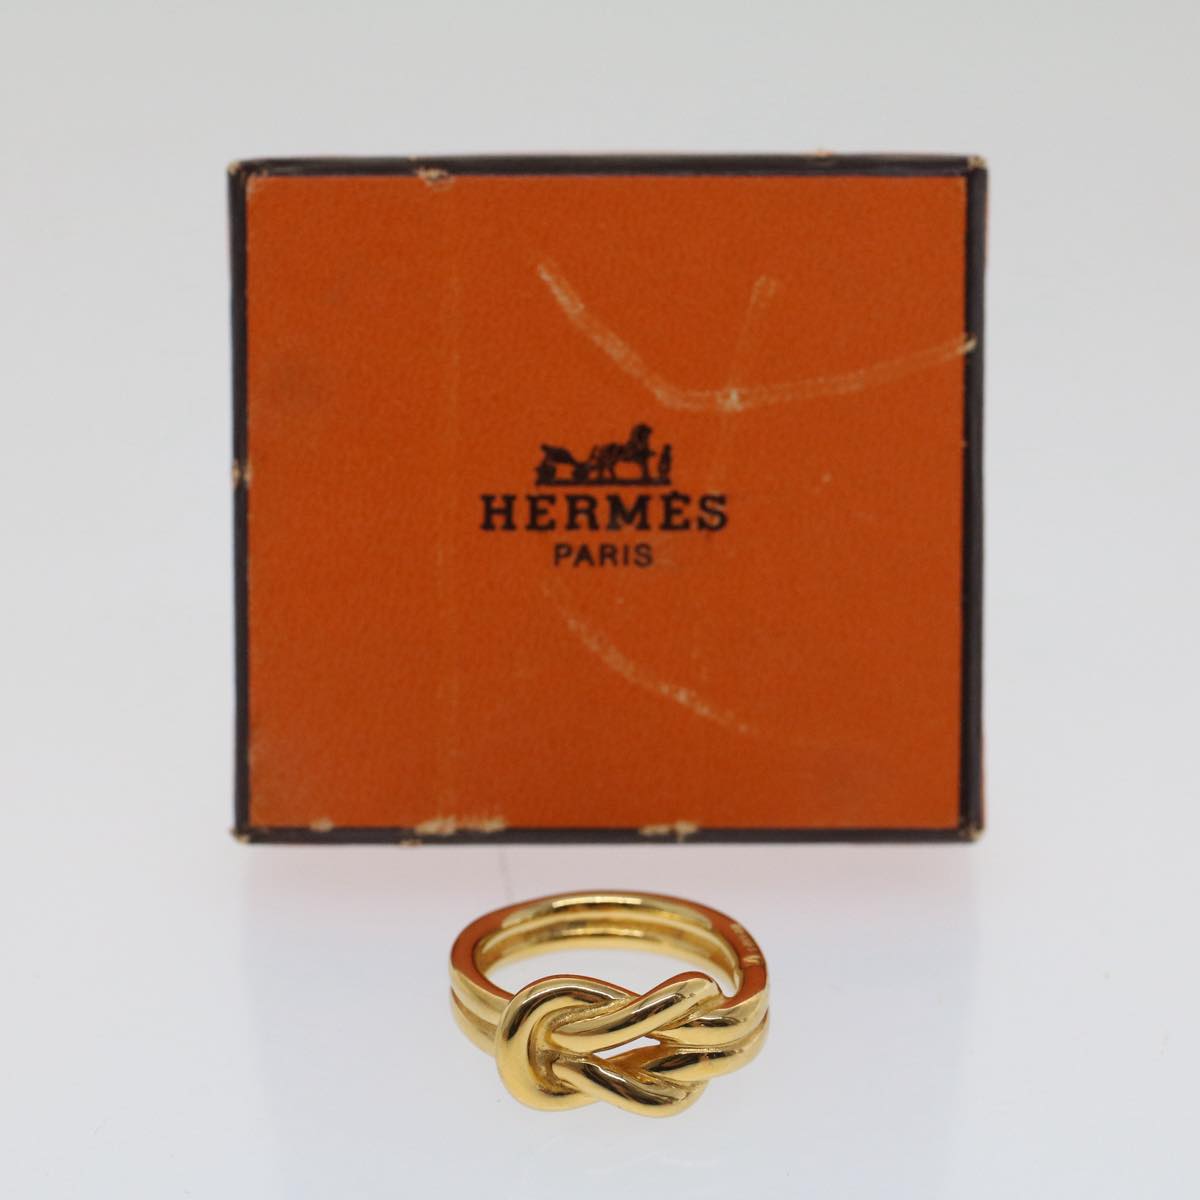 HERMES Atame Circle Knot Design Scarf Ring Metal Gold Tone Auth 51414